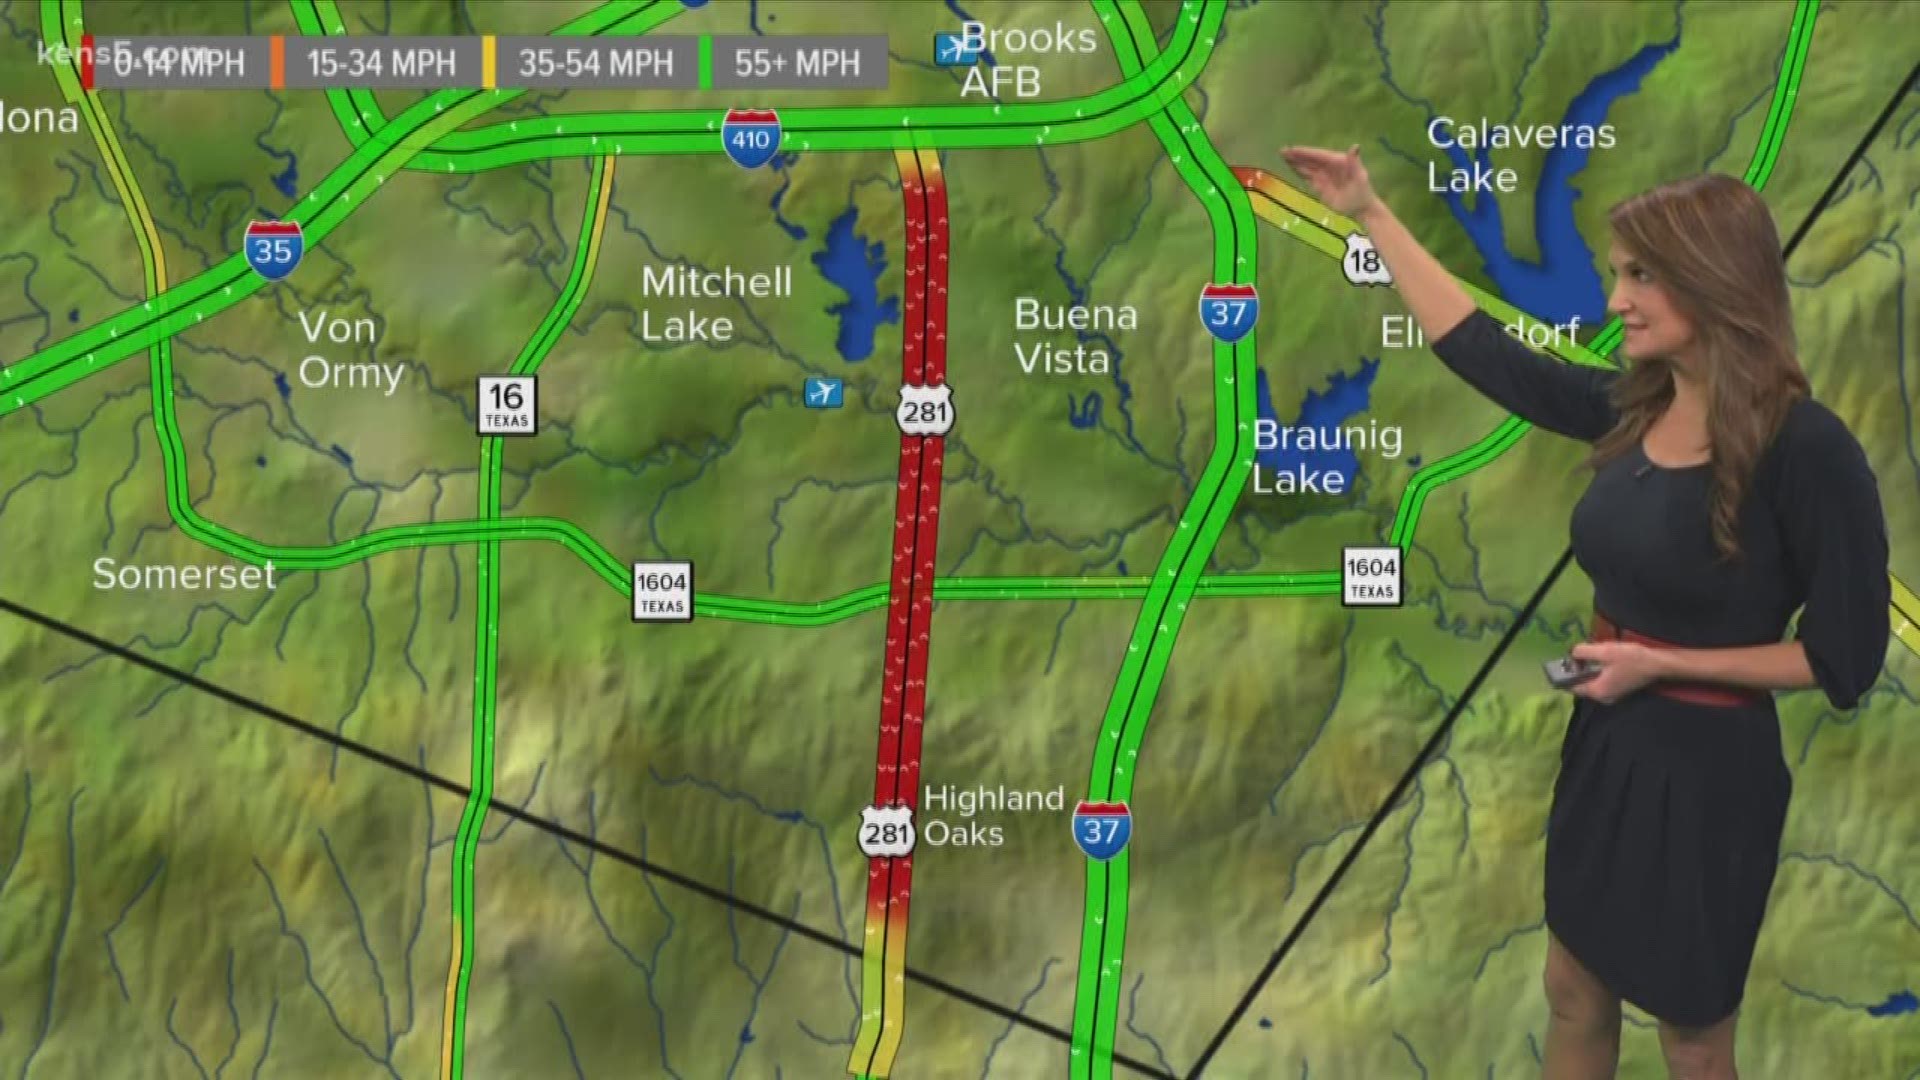 Traffic reporter Stacia Willson warns viewers to avoid the Highway 281 area on the south side.